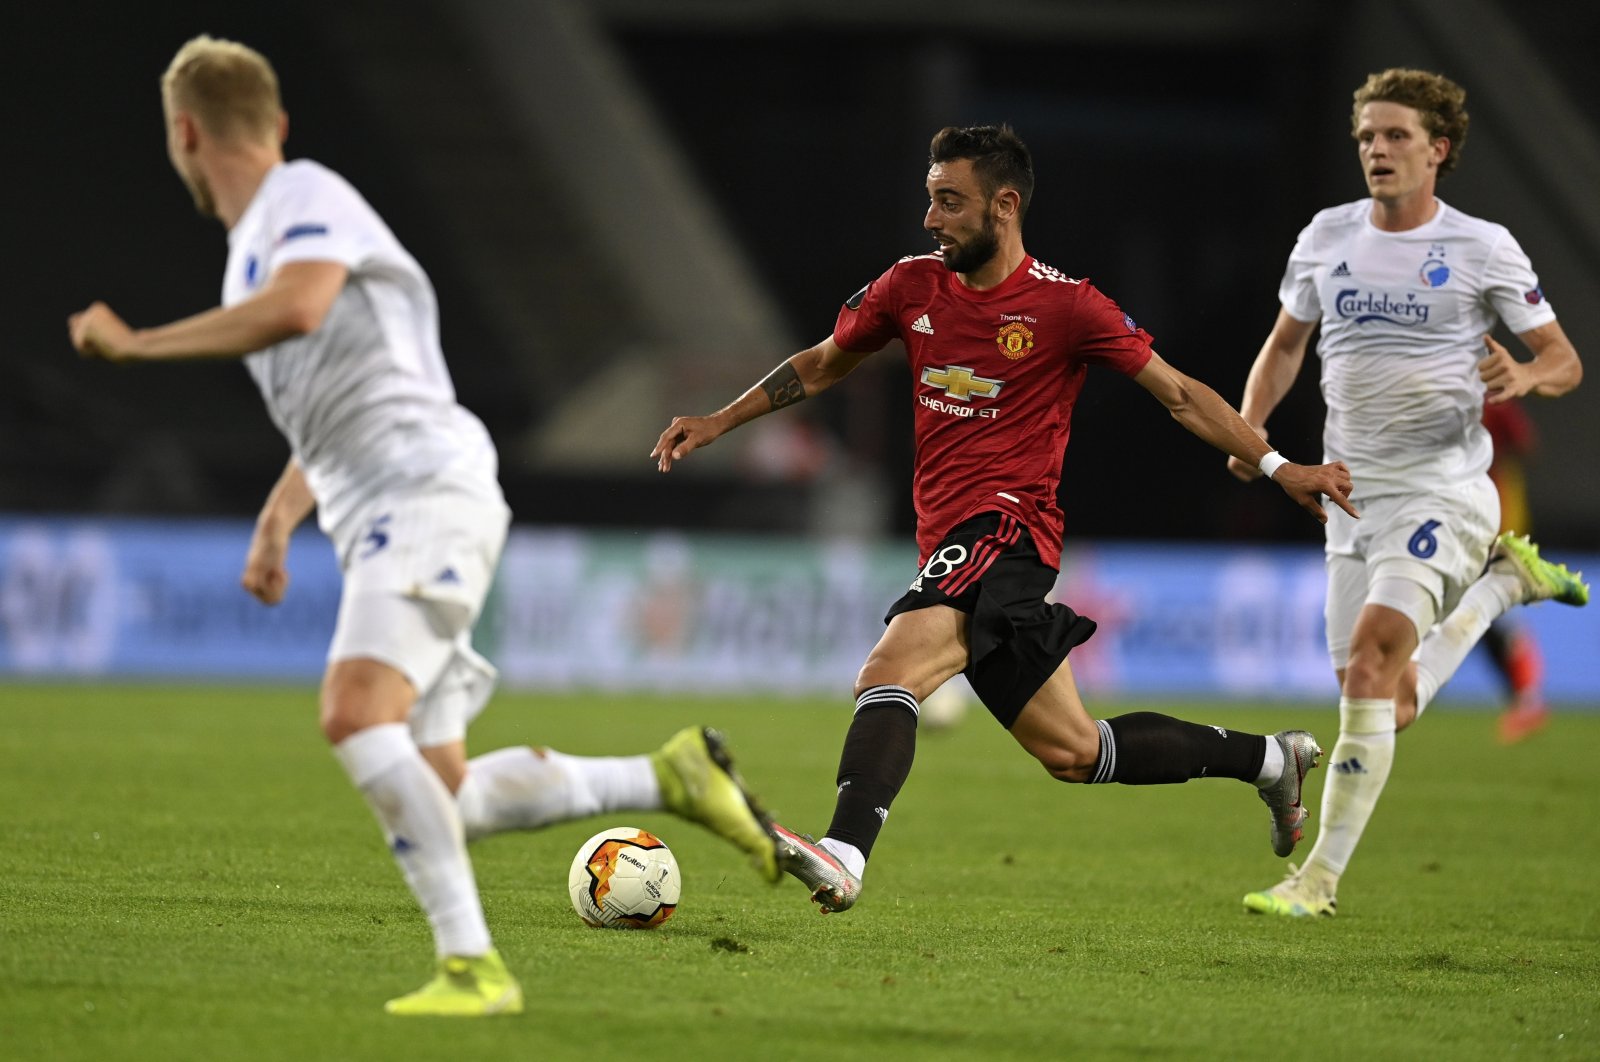 Manchester United's Bruno Fernandes, center, controls the ball during the Europa League quarter-final football match between Manchester United and Copenhagen at the Rhein Energie Stadium in Cologne, Germany, Monday, Aug. 10, 2020. (EPA via AP)